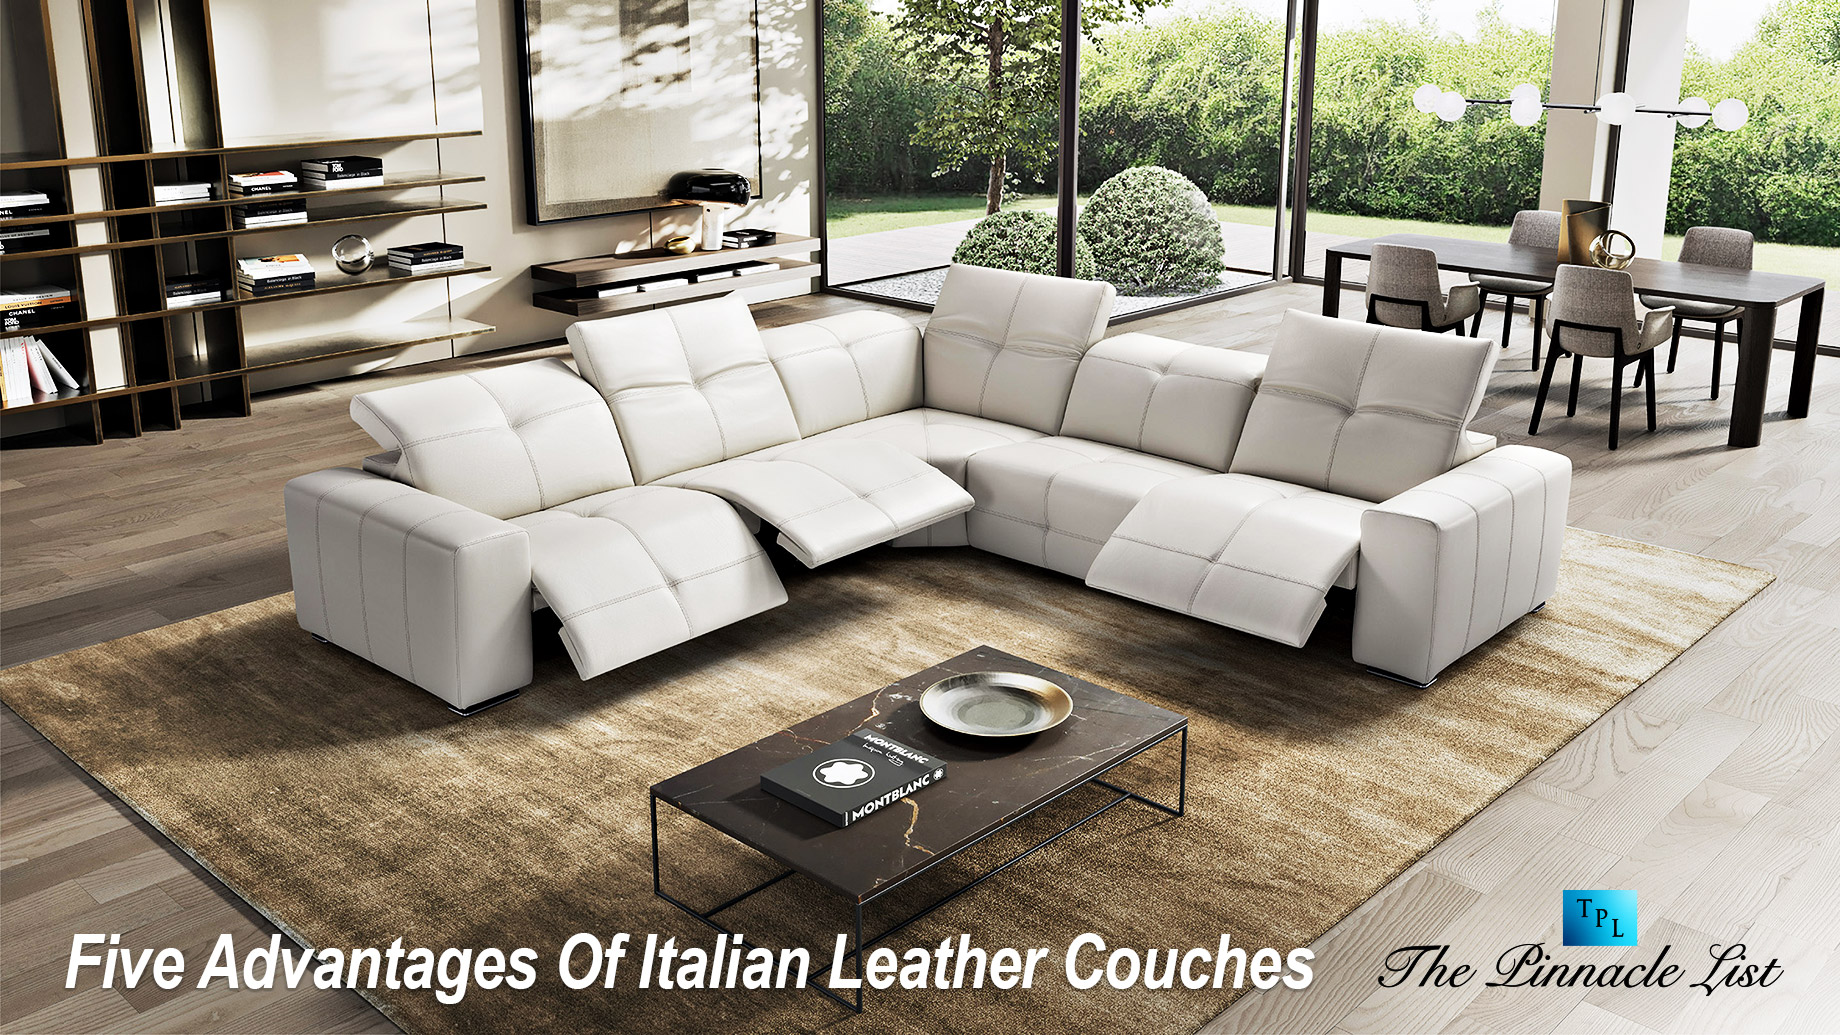 Five Advantages Of Italian Leather Couches